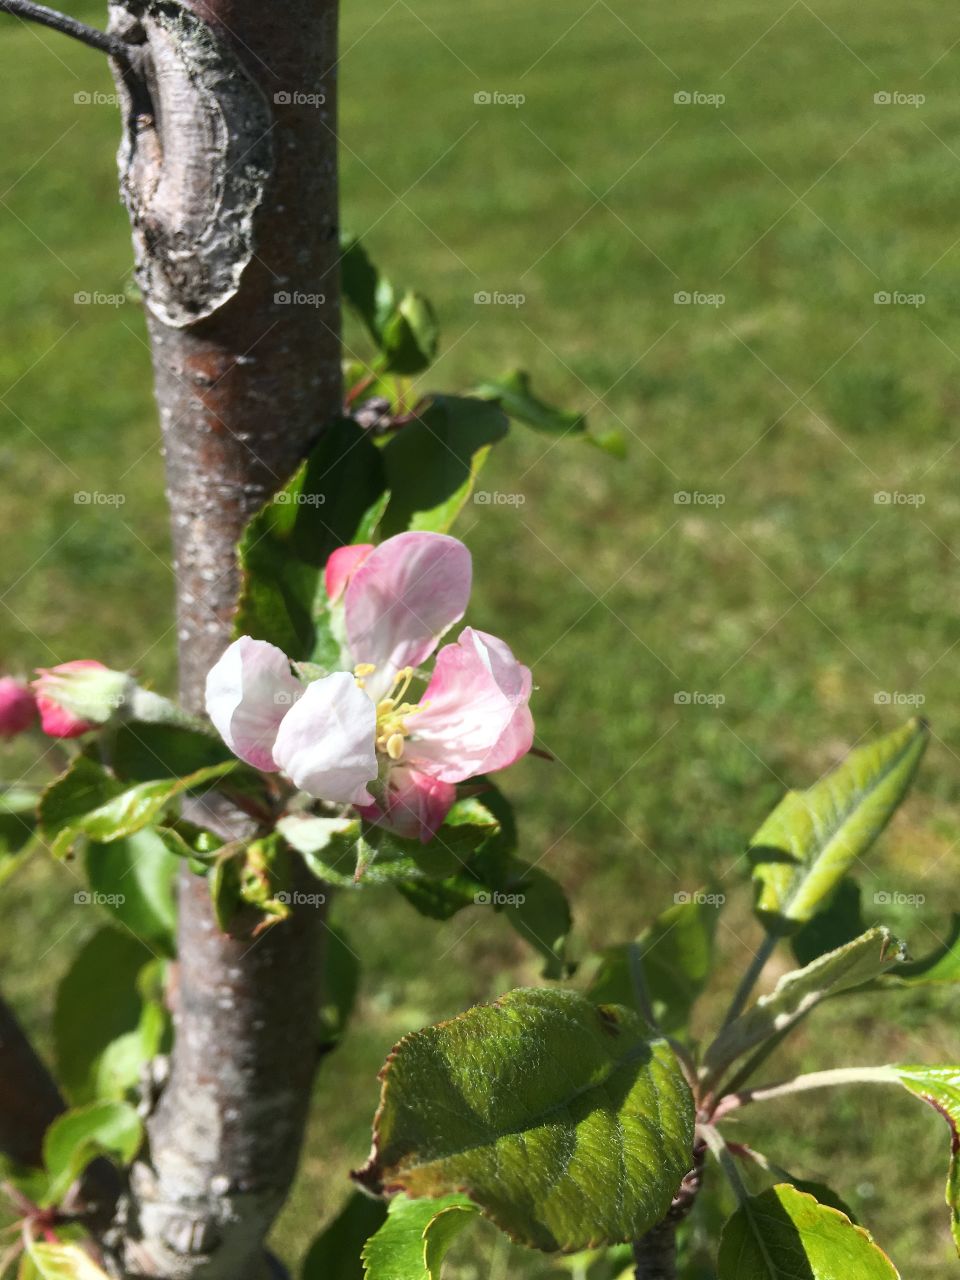 Apple Blossom in bloom. Pink and white flowers on Apple tree. 